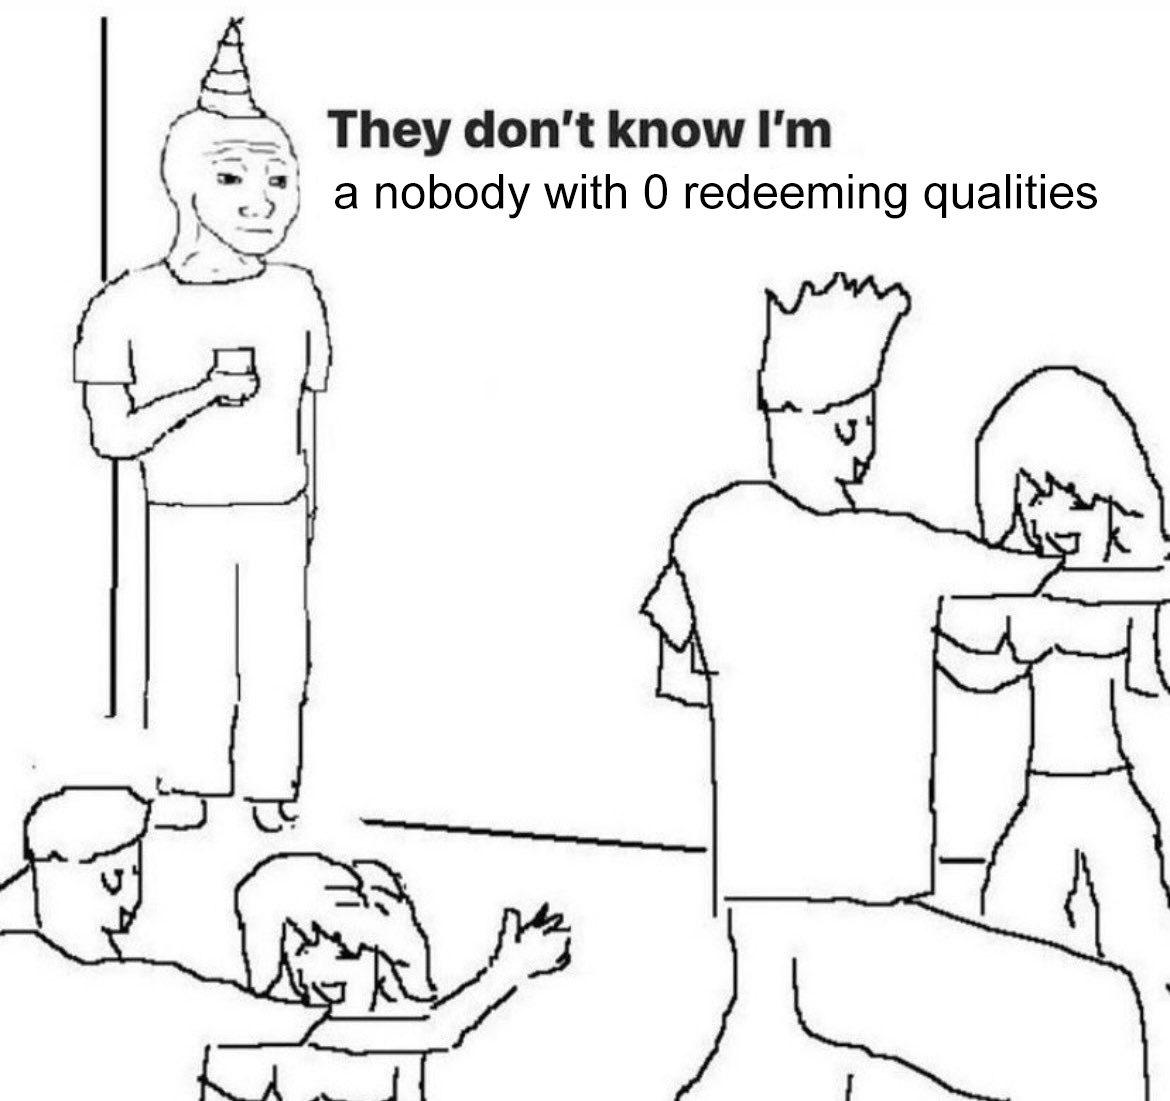 they dont know im wojak meme twitter - me at parties - They don't know I'm a nobody with 0 redeeming qualities